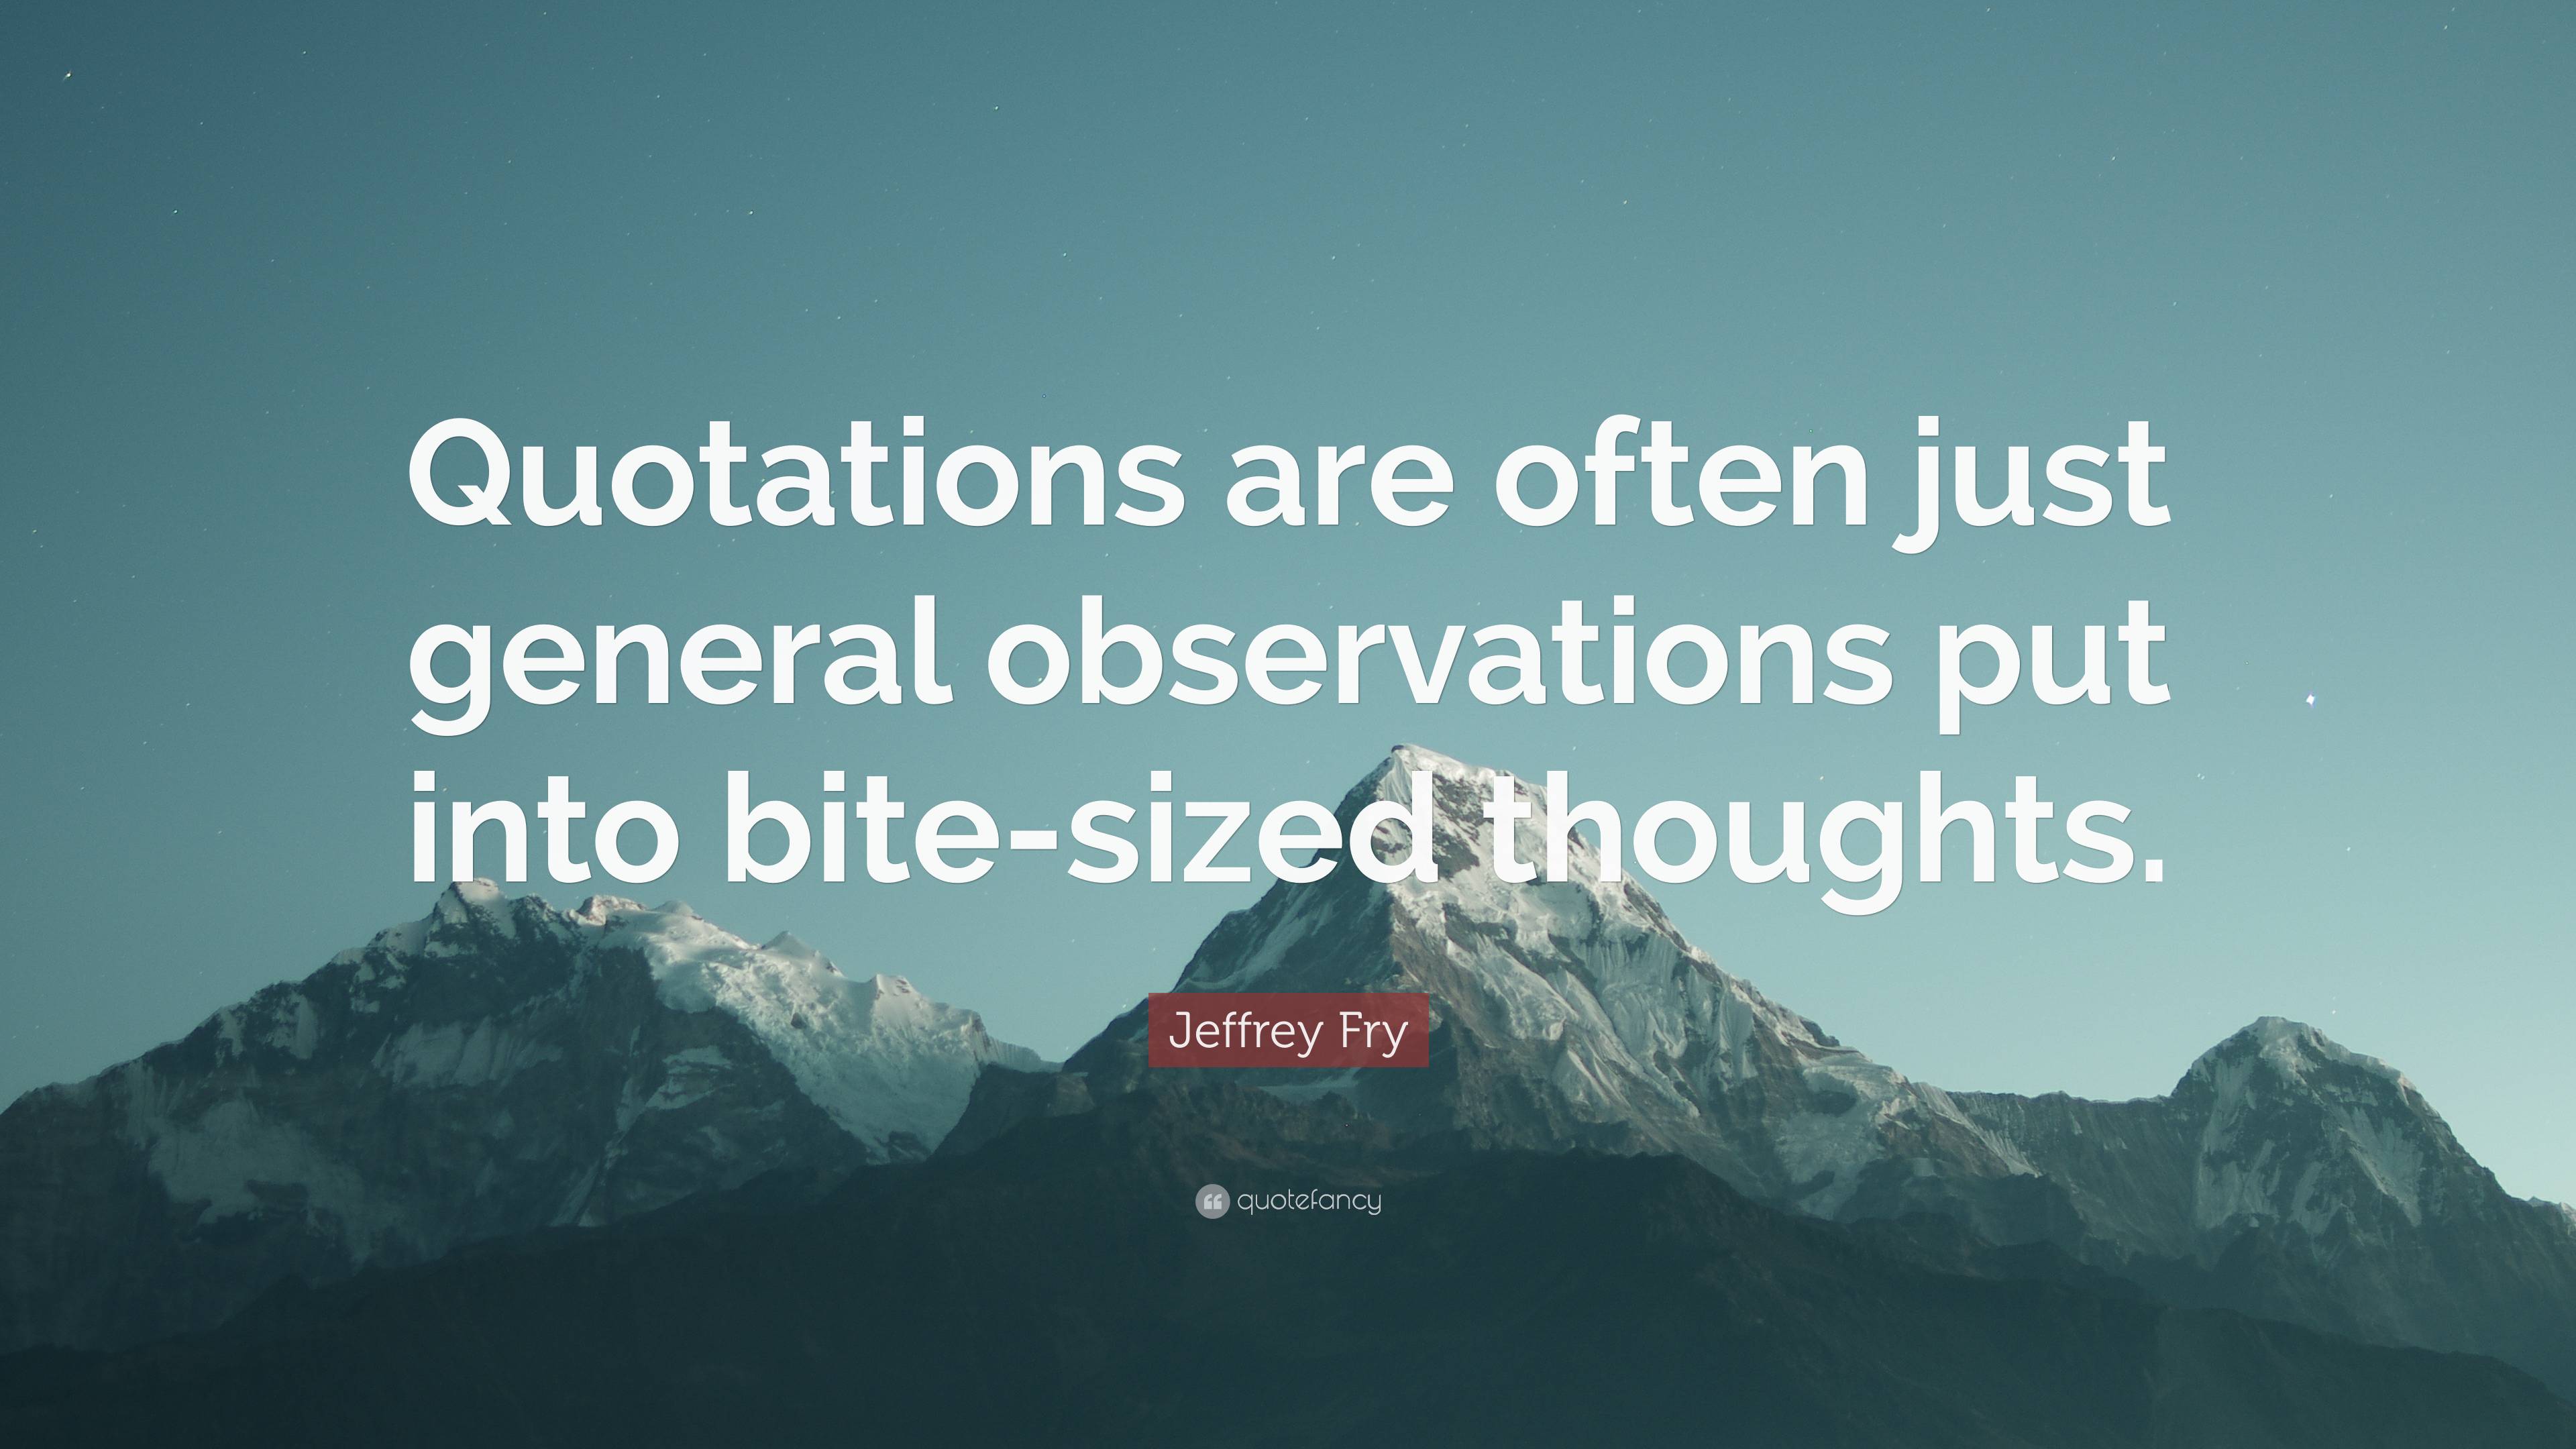 Jeffrey Fry Quote “quotations Are Often Just General Observations Put Into Bite Sized Thoughts” 